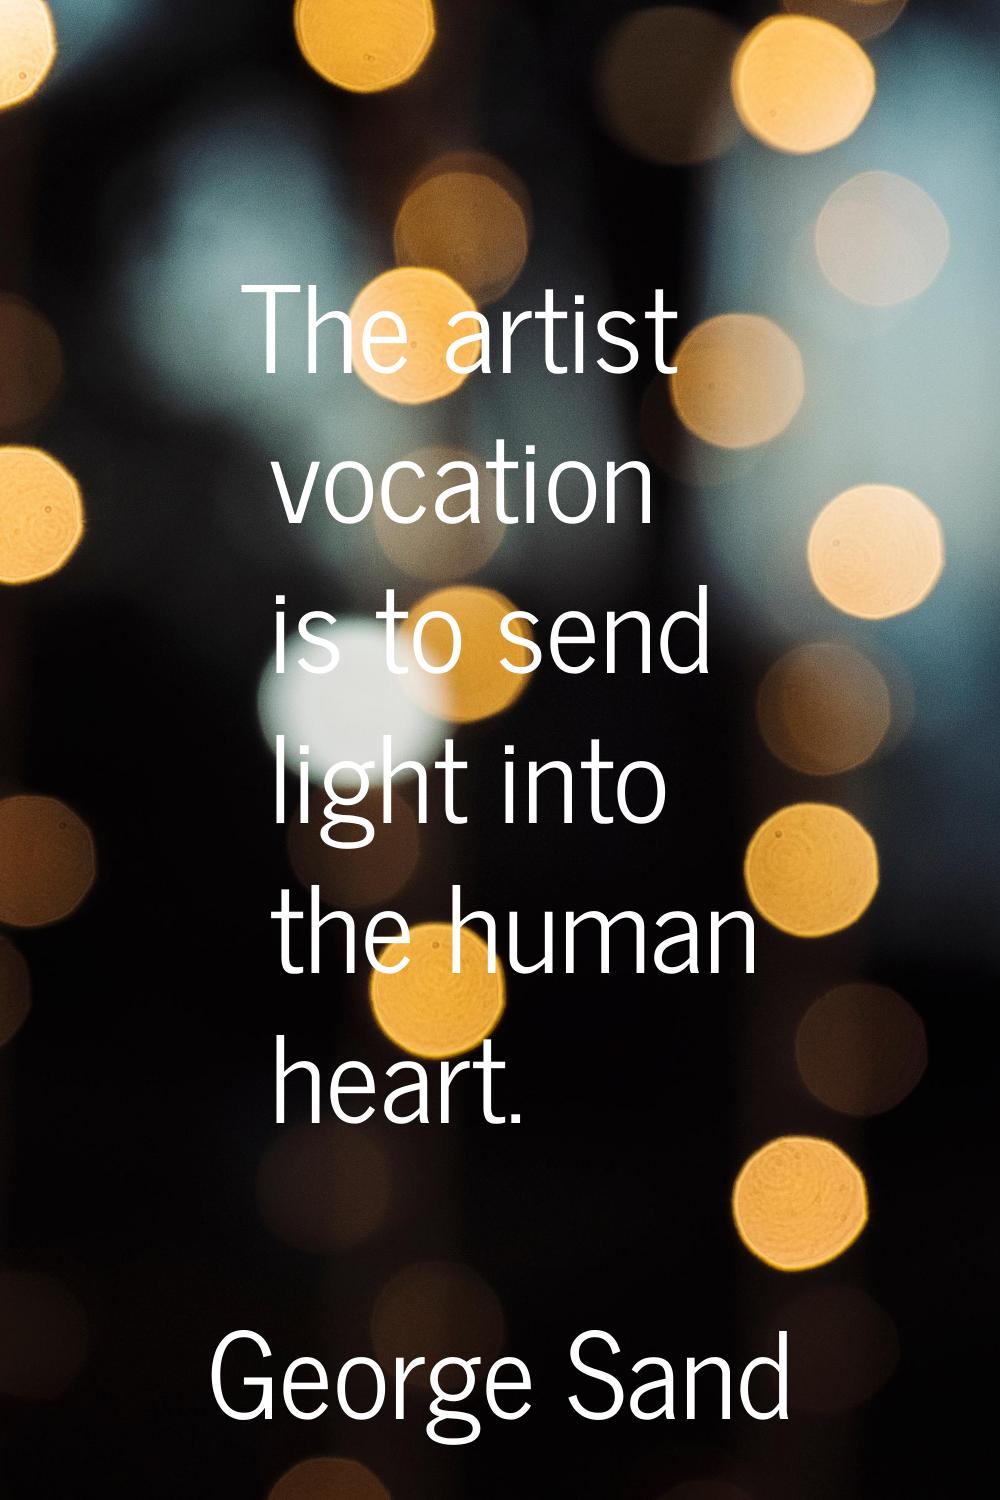 The artist vocation is to send light into the human heart.